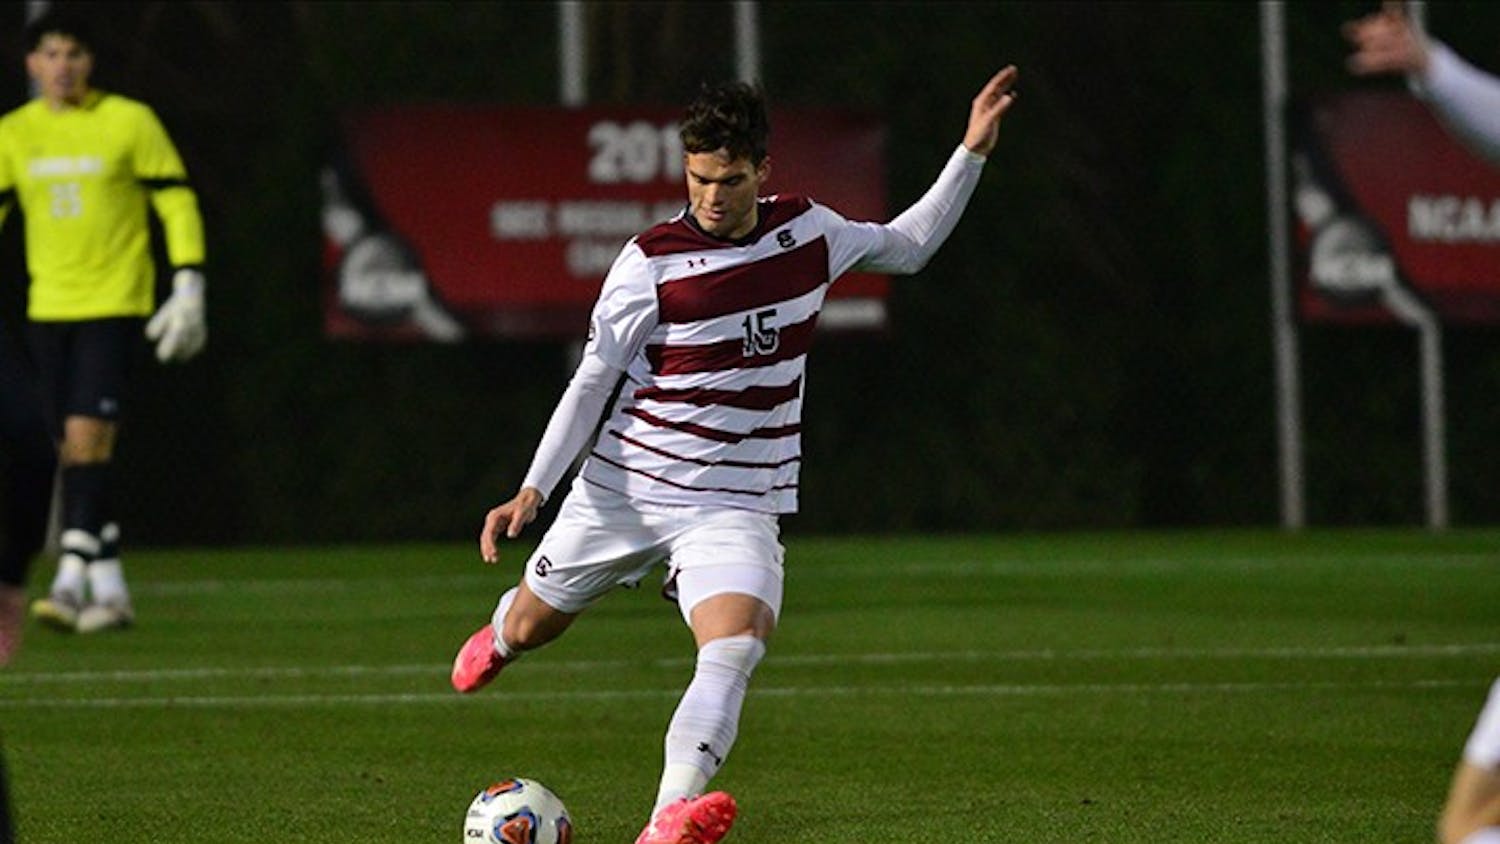 Sophomore defender Mike Roby kicks the ball during the Gamecocks’ win over USC Upstate Wednesday. South Carolina won 2-1 in overtime.